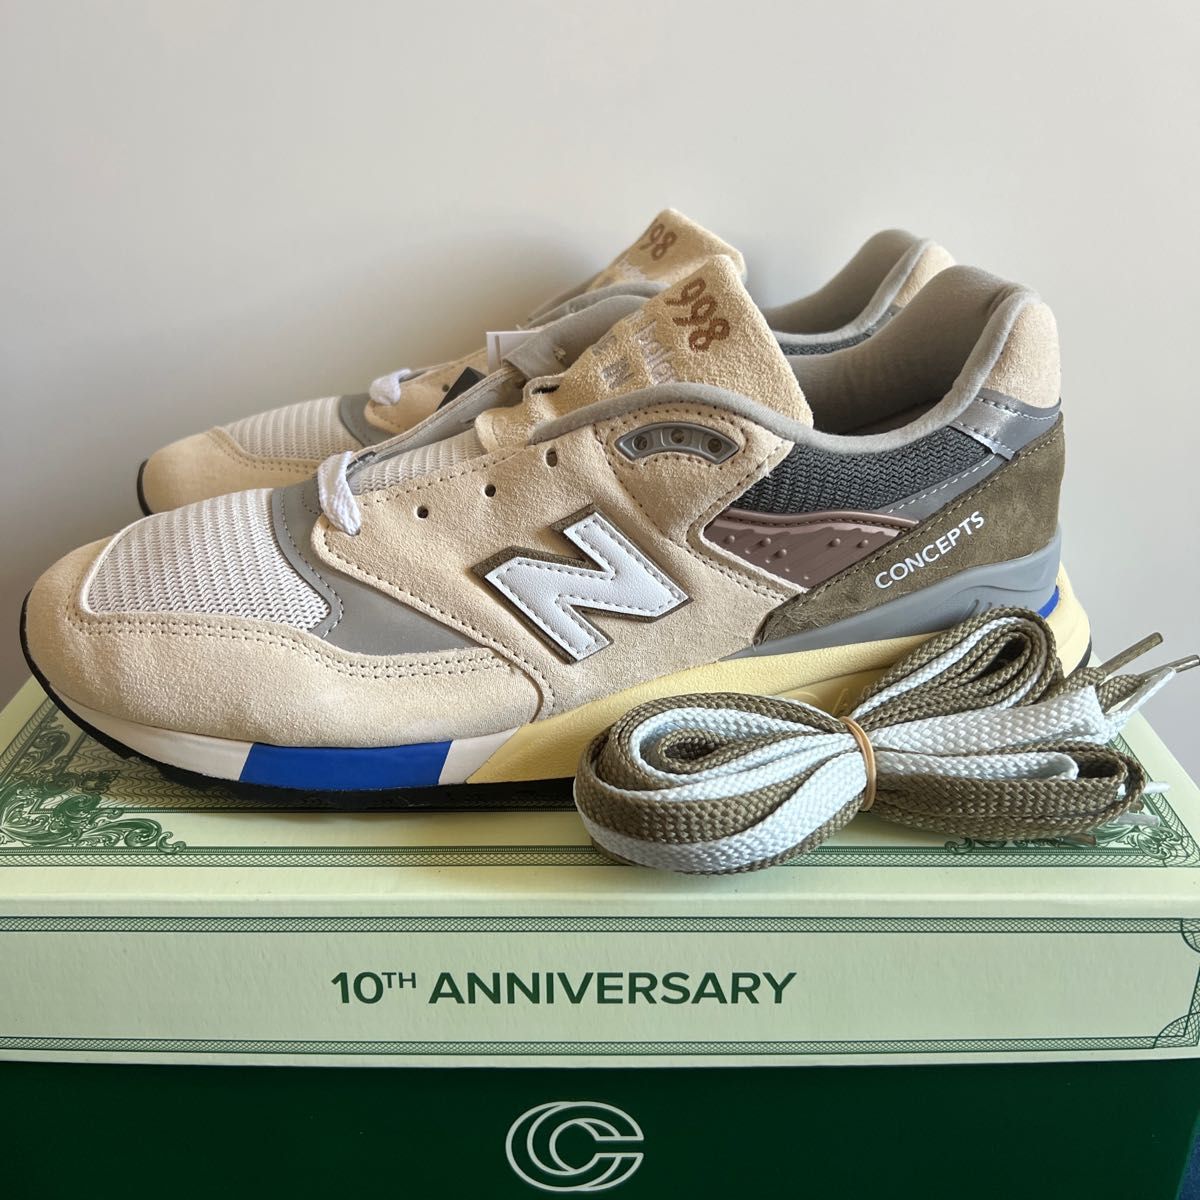 .5cm Concepts New Balance  "C Note"コンセプツ ニューバランス 周年 復刻